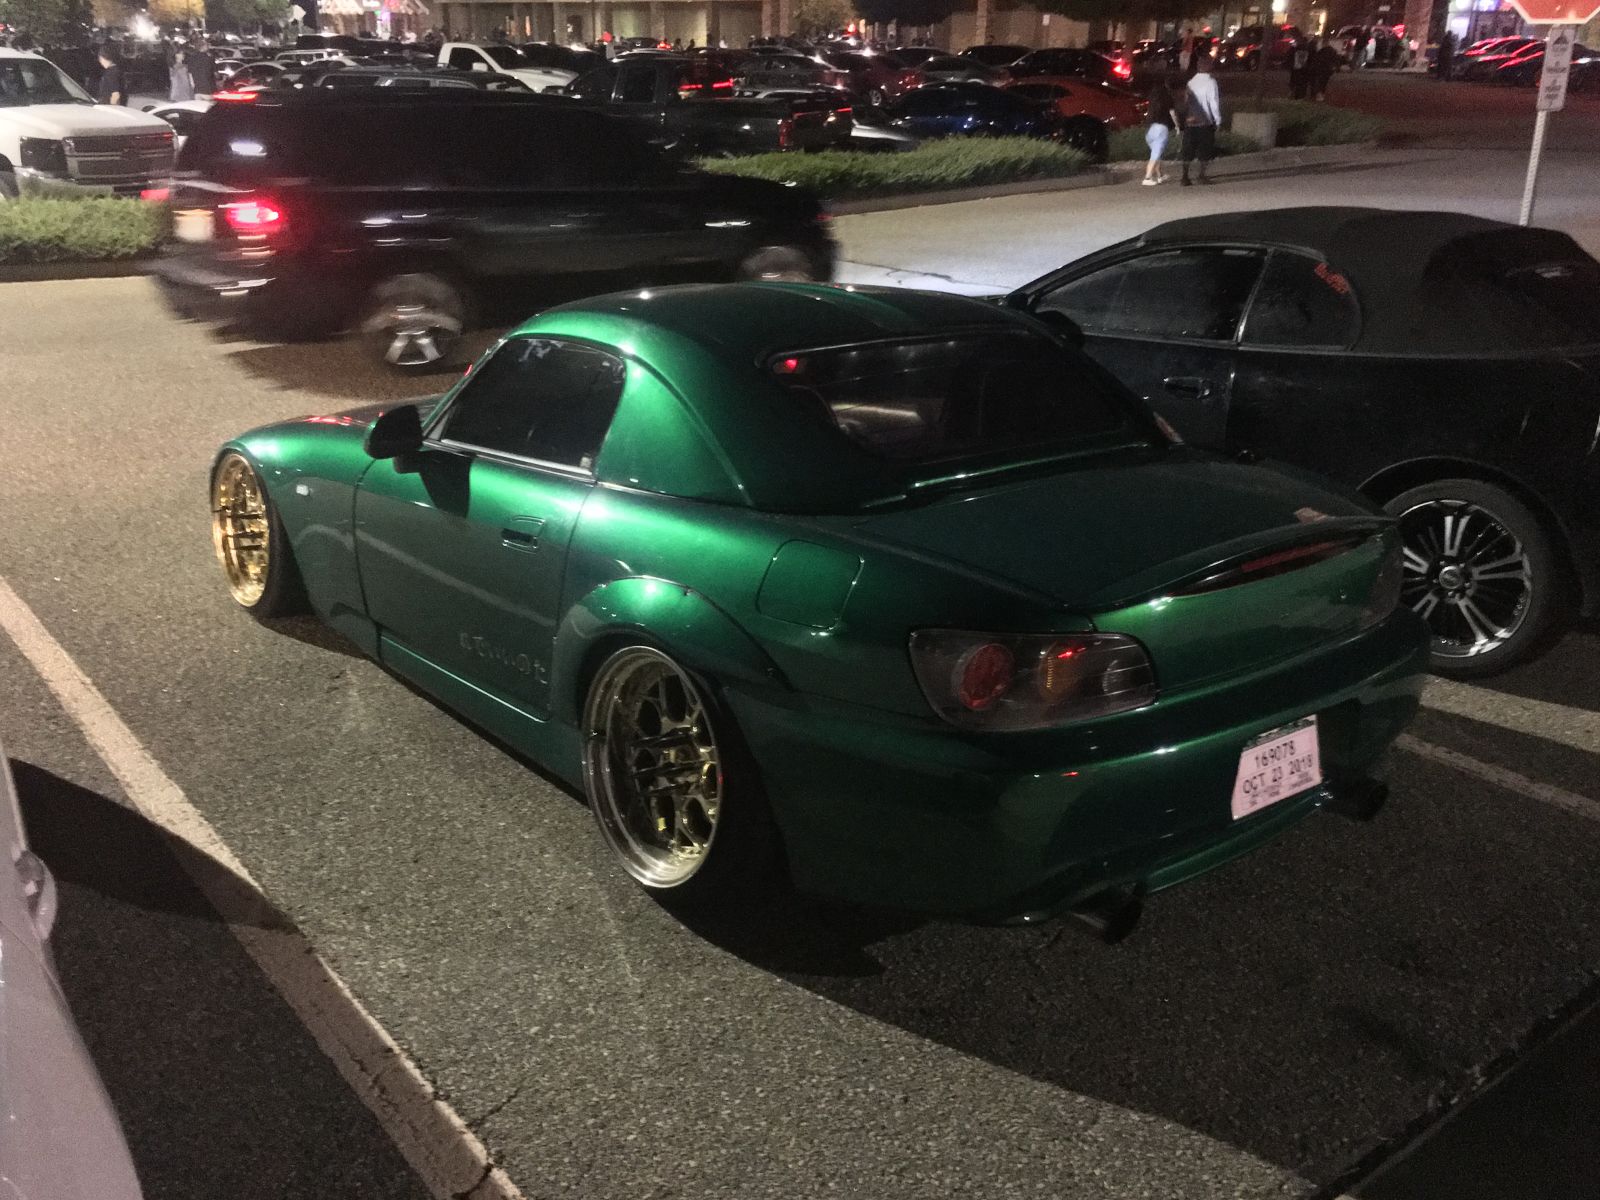 Beautiful green S2000 with gold wheels (this color combo is my FETISH)